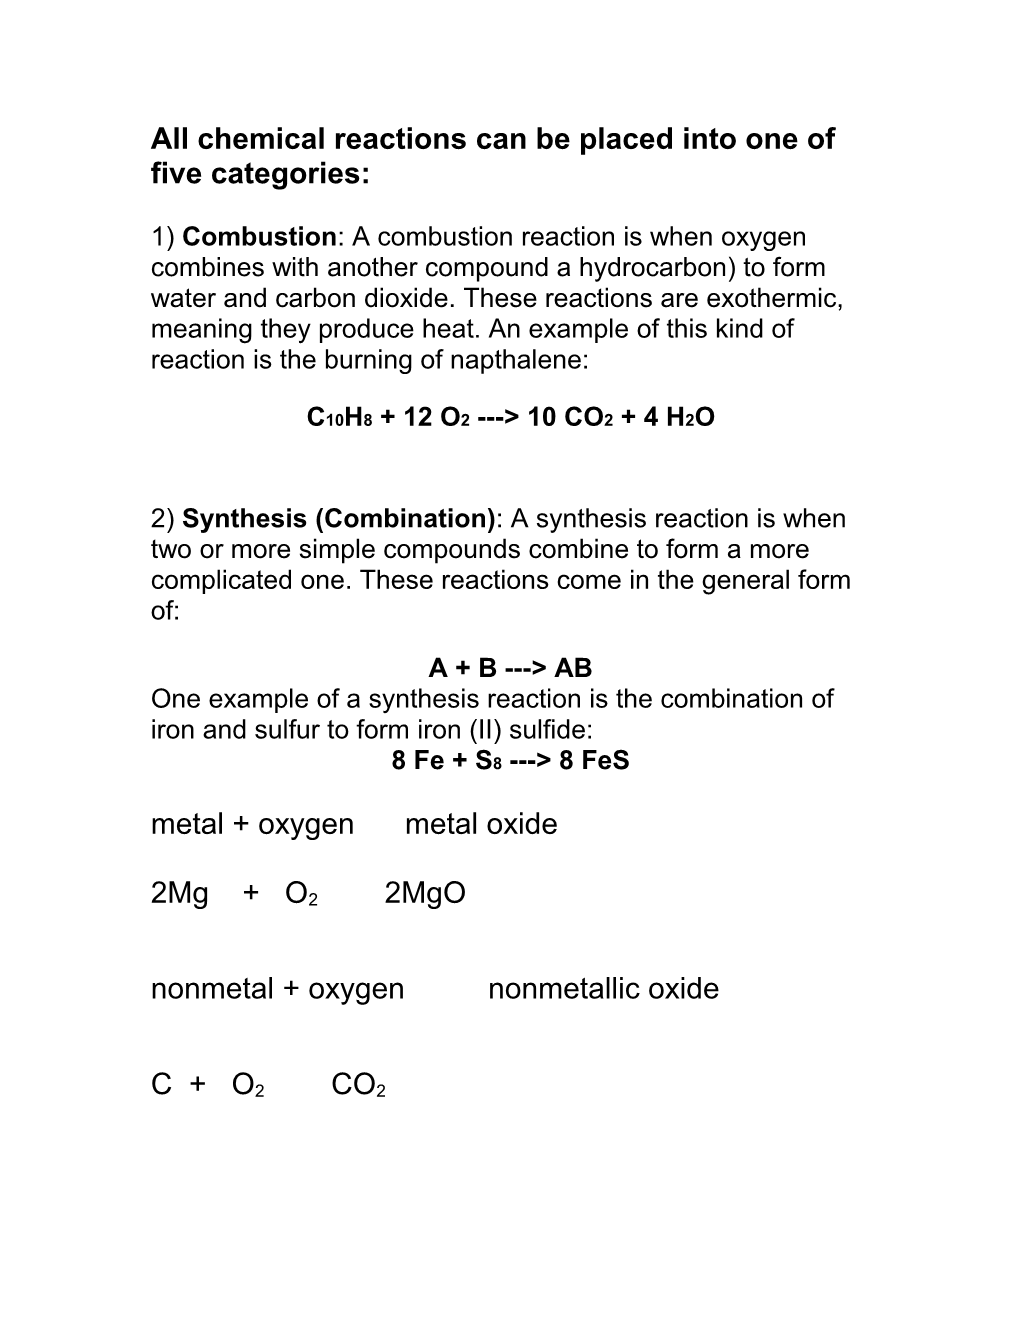 All Chemical Reactions Can Be Placed Into One of Five Categories